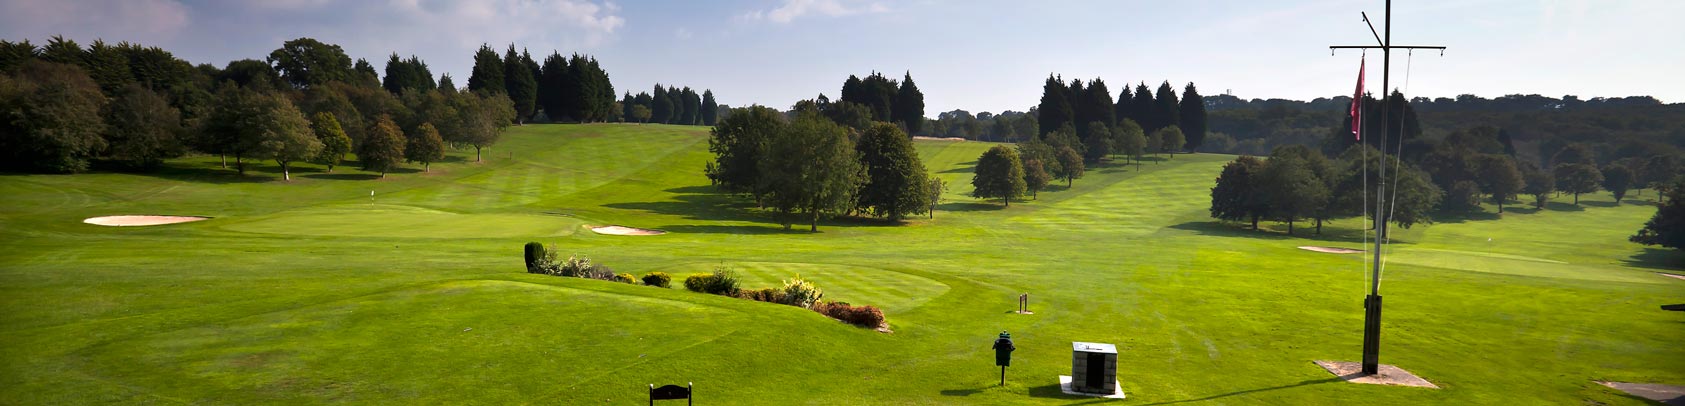 Golf Course South Wales, Golf Days Cardiff